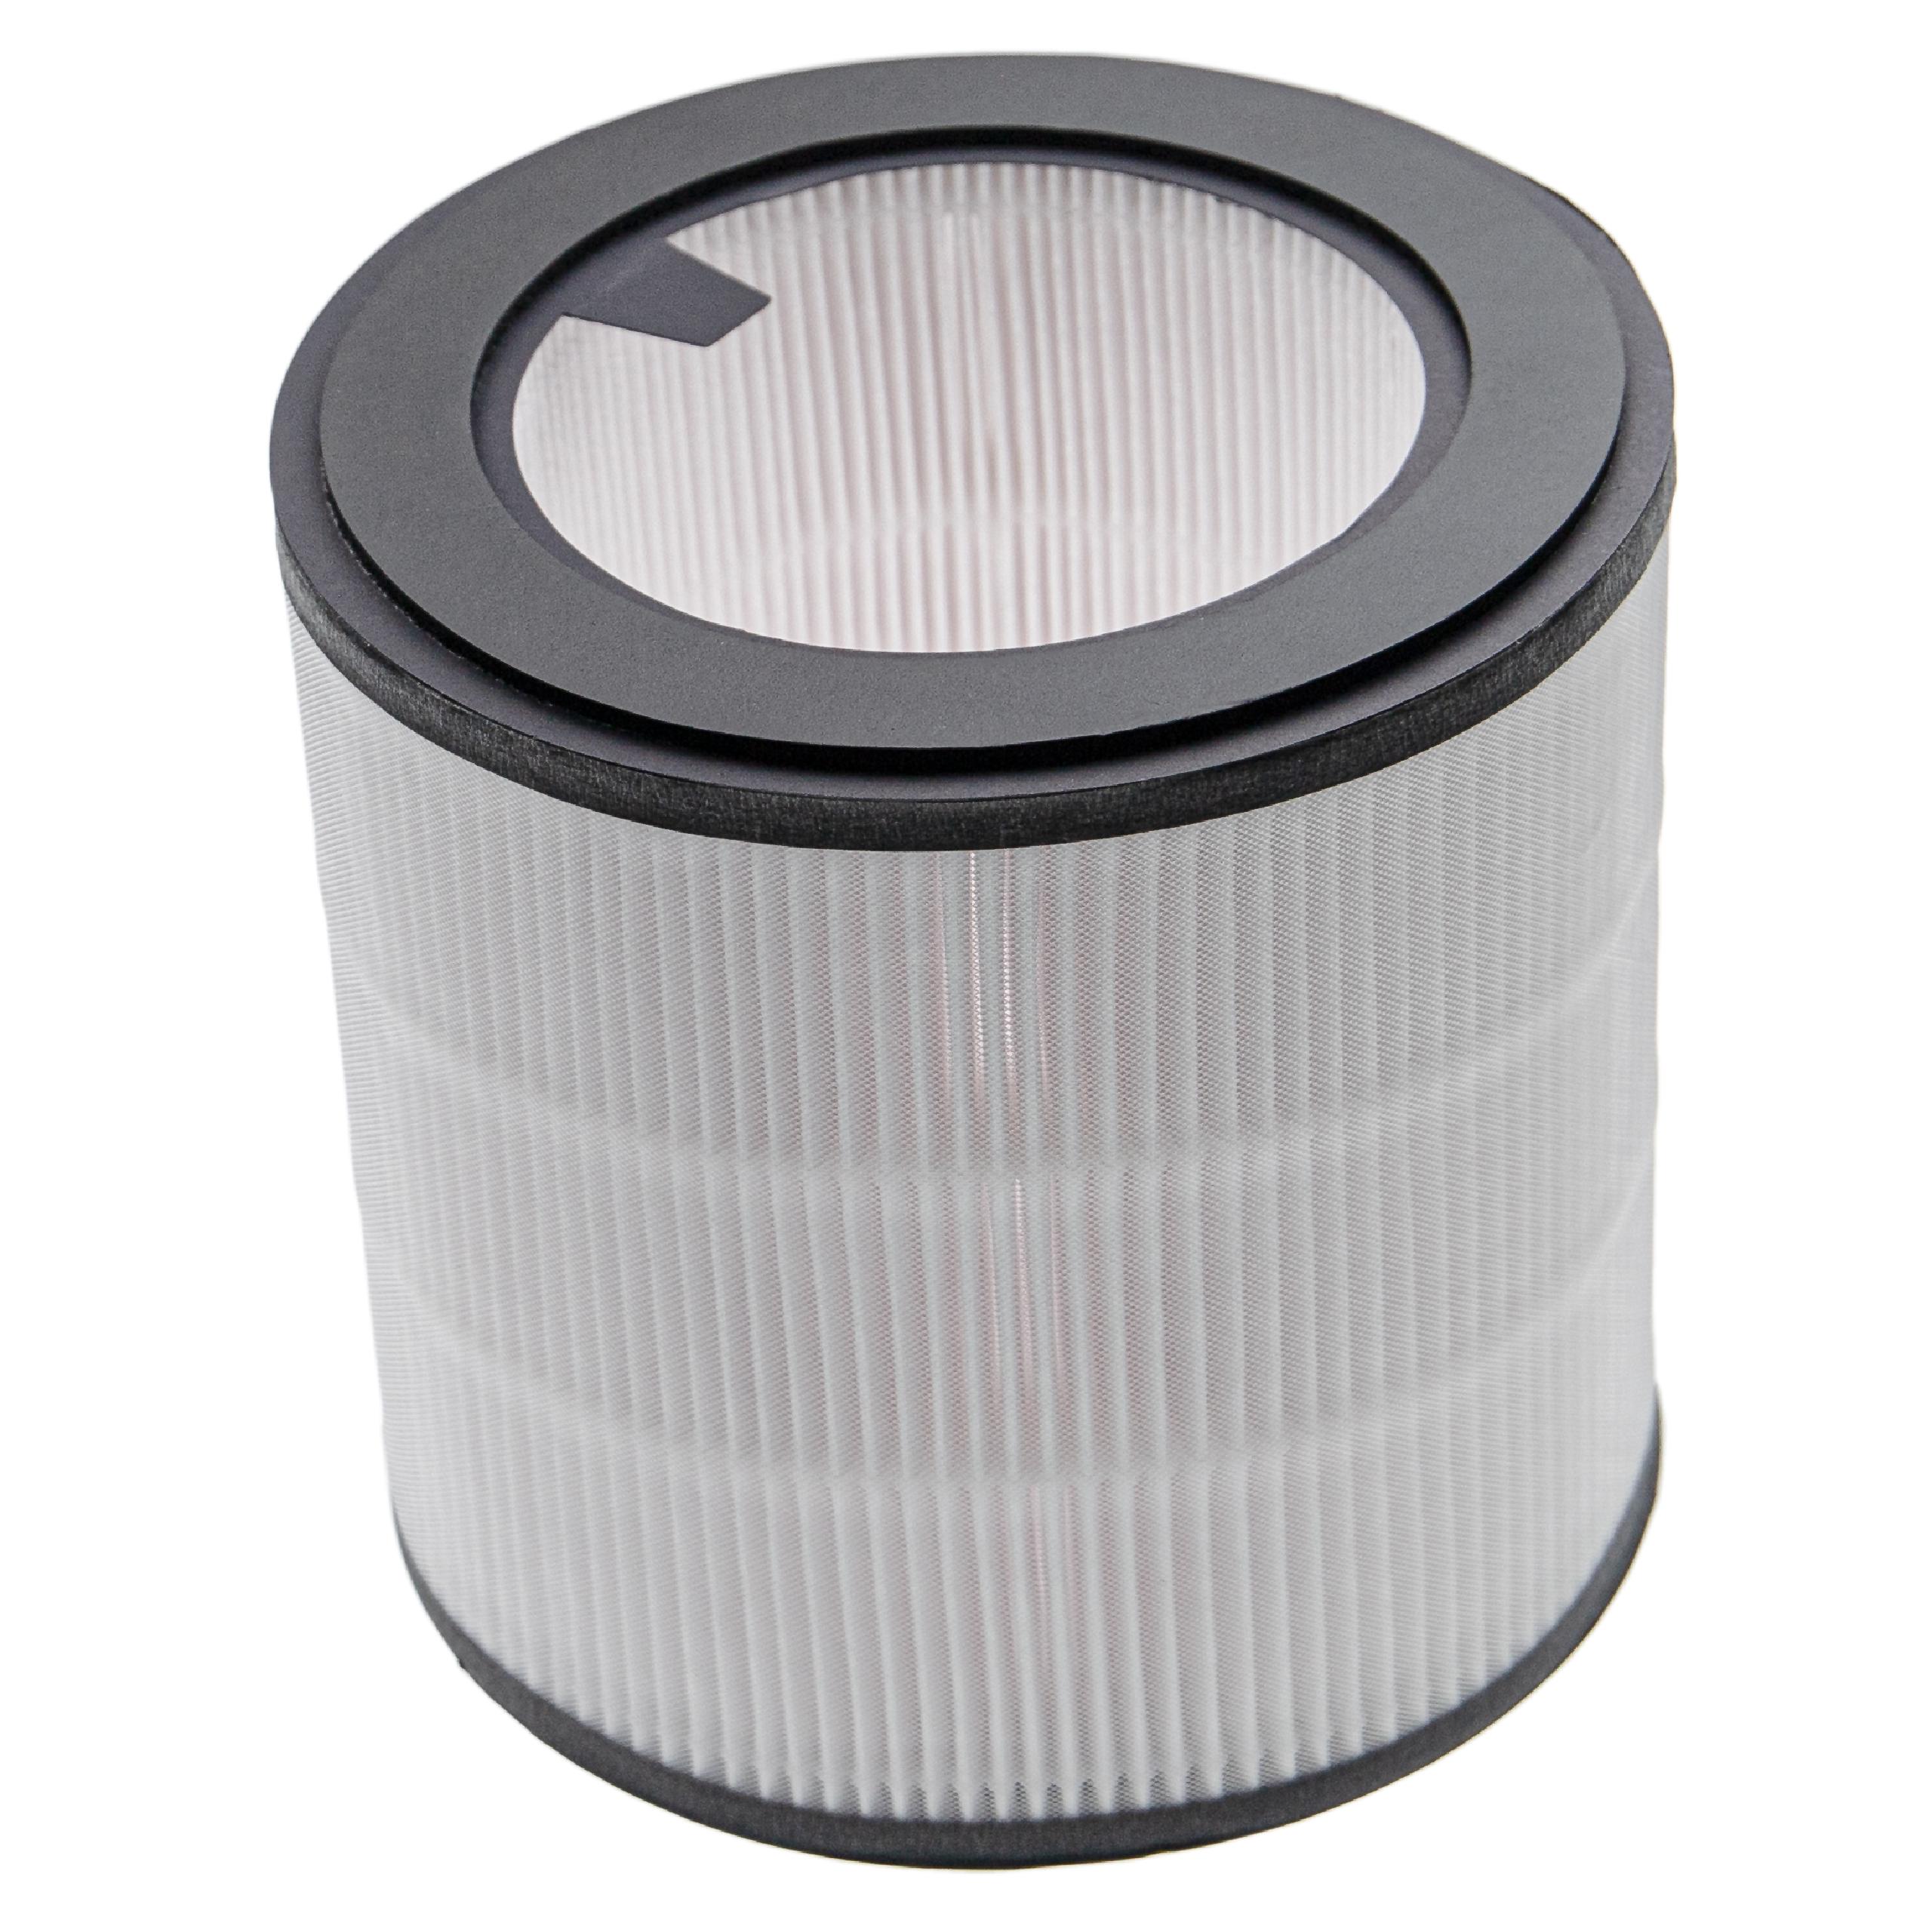 vhbw HEPA Filter Replacement for Philips FY0194/30 for Air Cleaner - Spare Air Filter